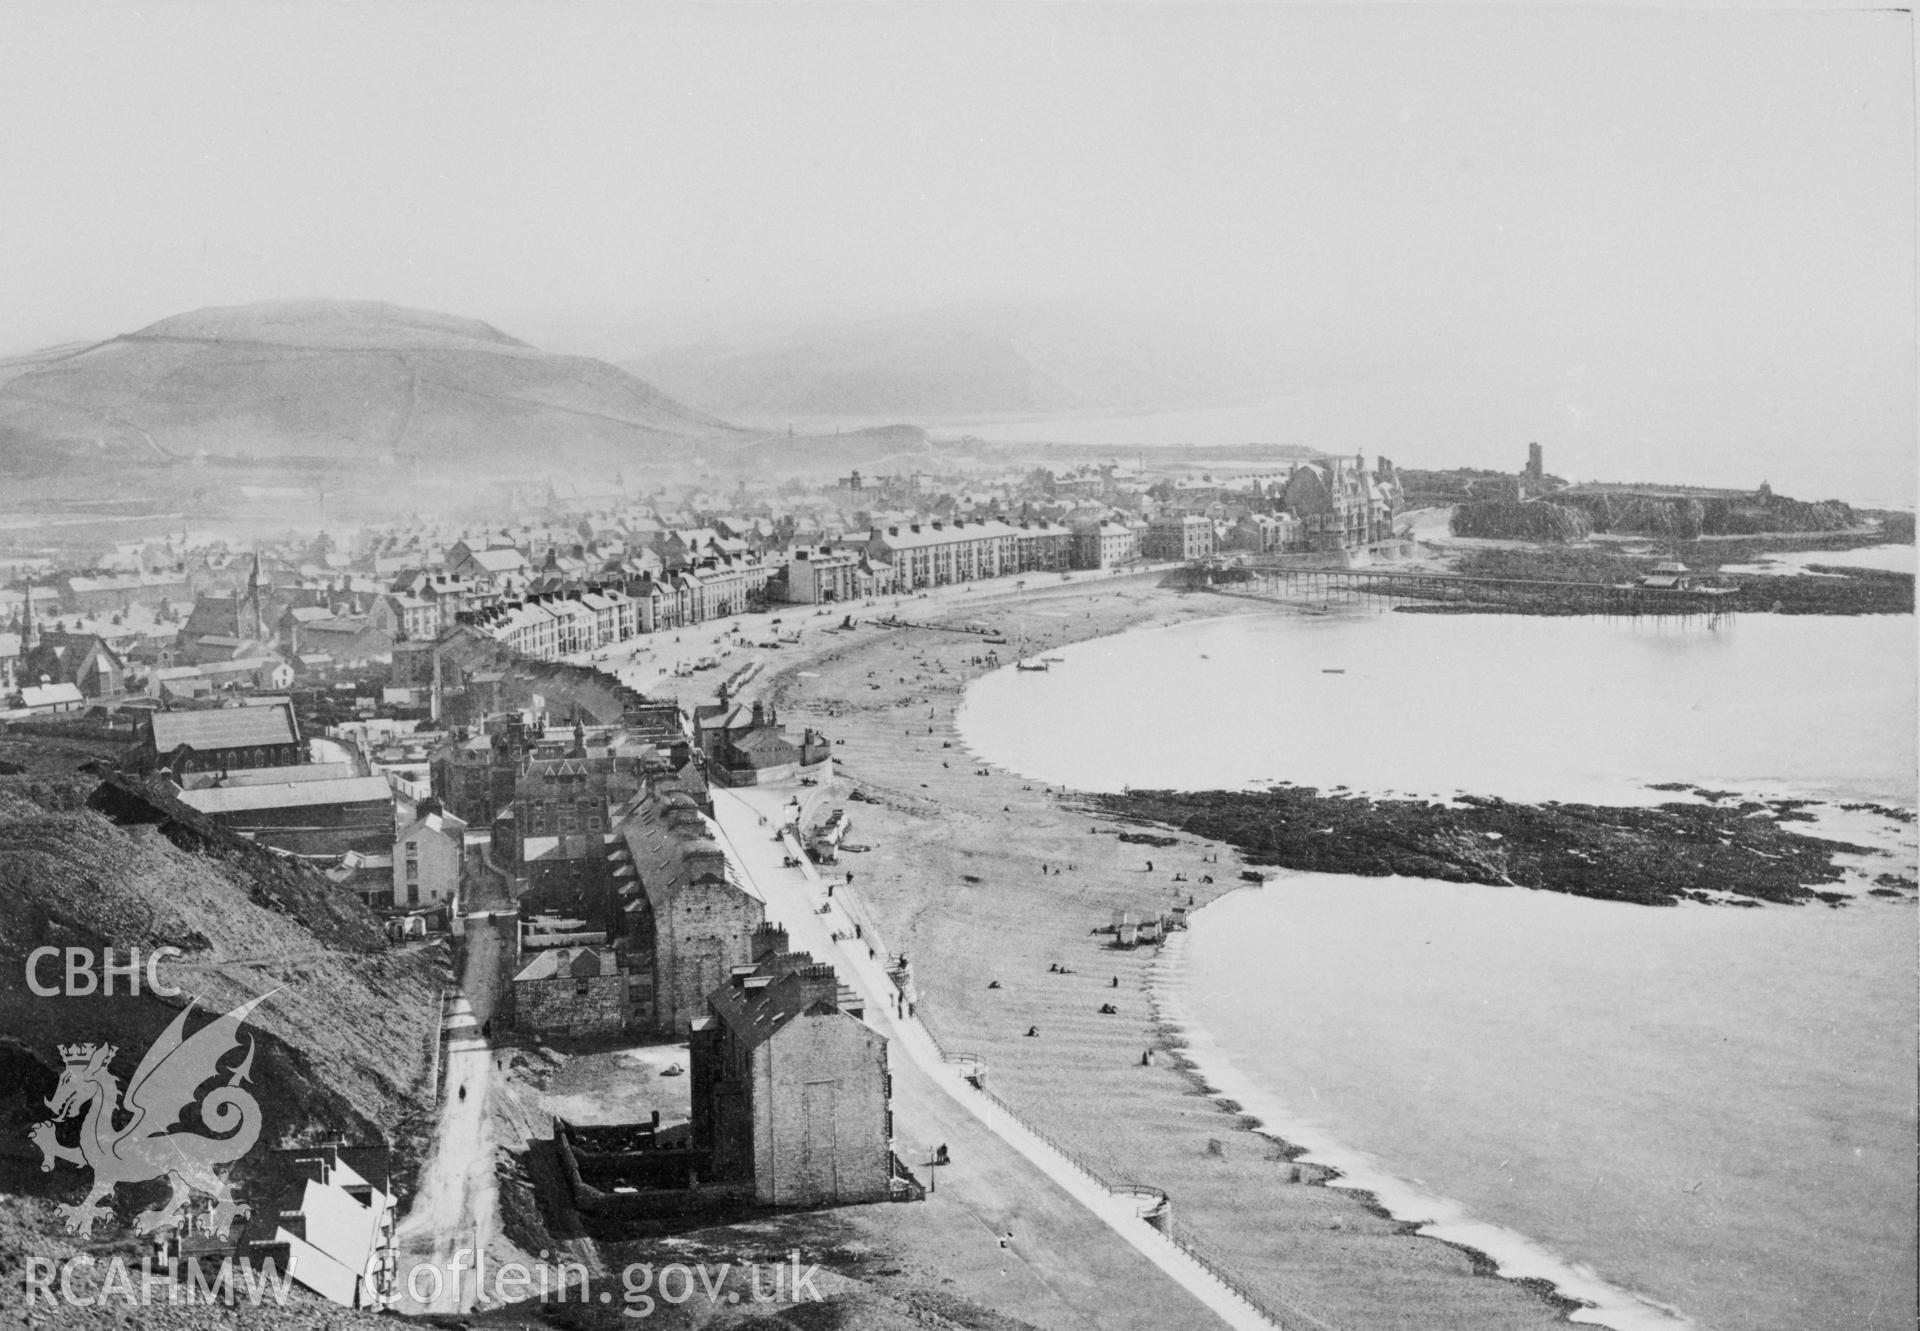 Five mounted, black and white photographs showing early views of Aberystwyth, including a view showing North Parade in flood, a view of the castle, a view of the promenade from Constitution Hill and a view of The Queen's Hotel.